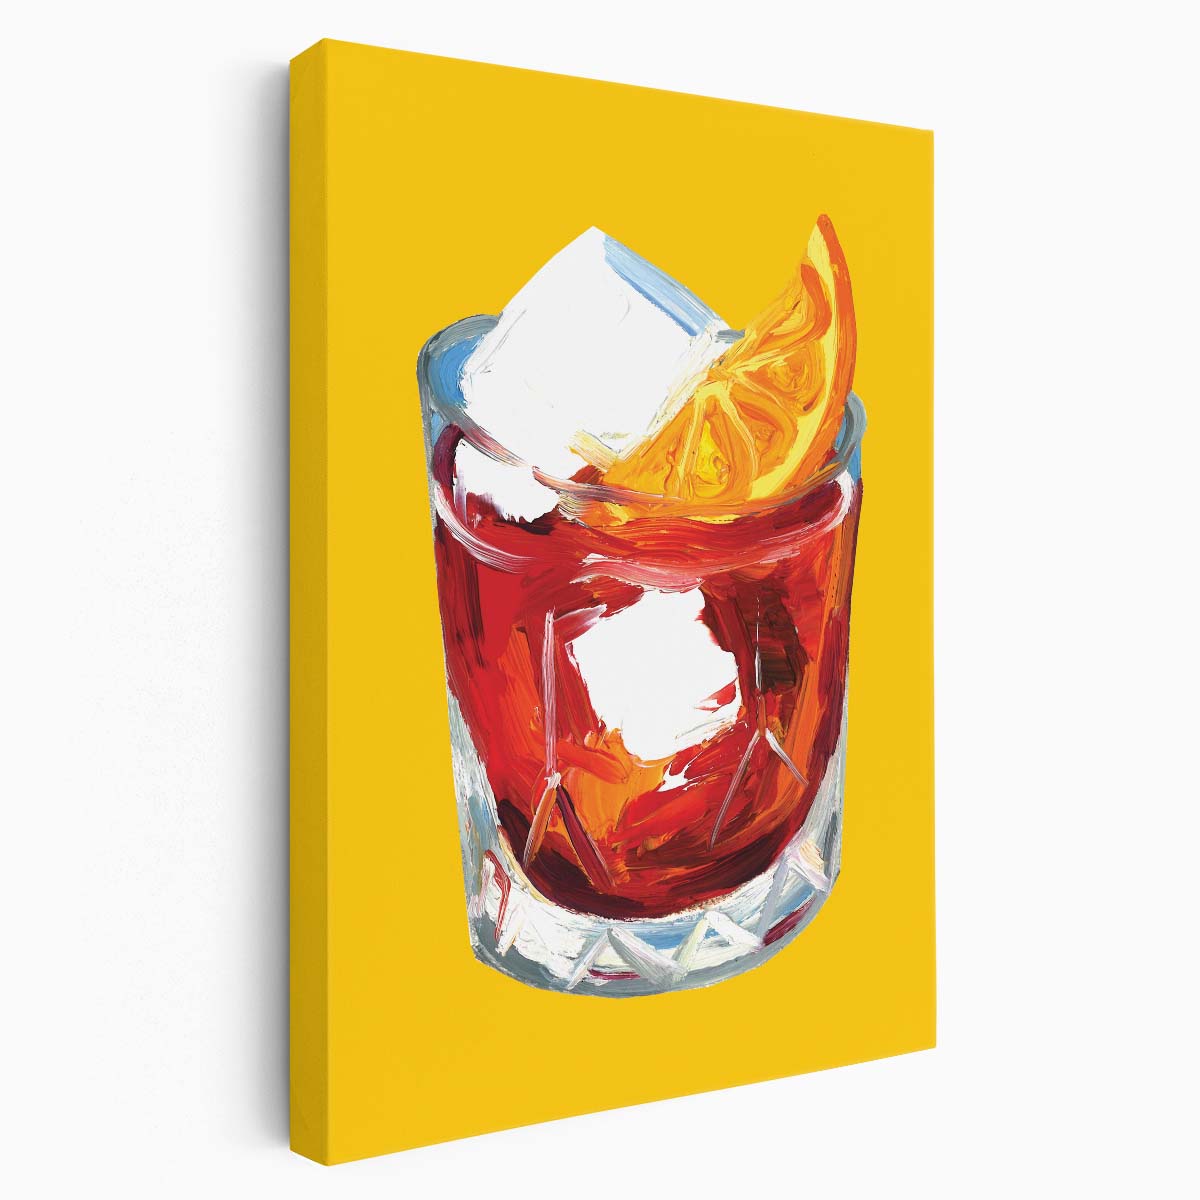 Colorful Negroni Cocktail Illustration, Icy Winter Bar Scene Art by Luxuriance Designs, made in USA